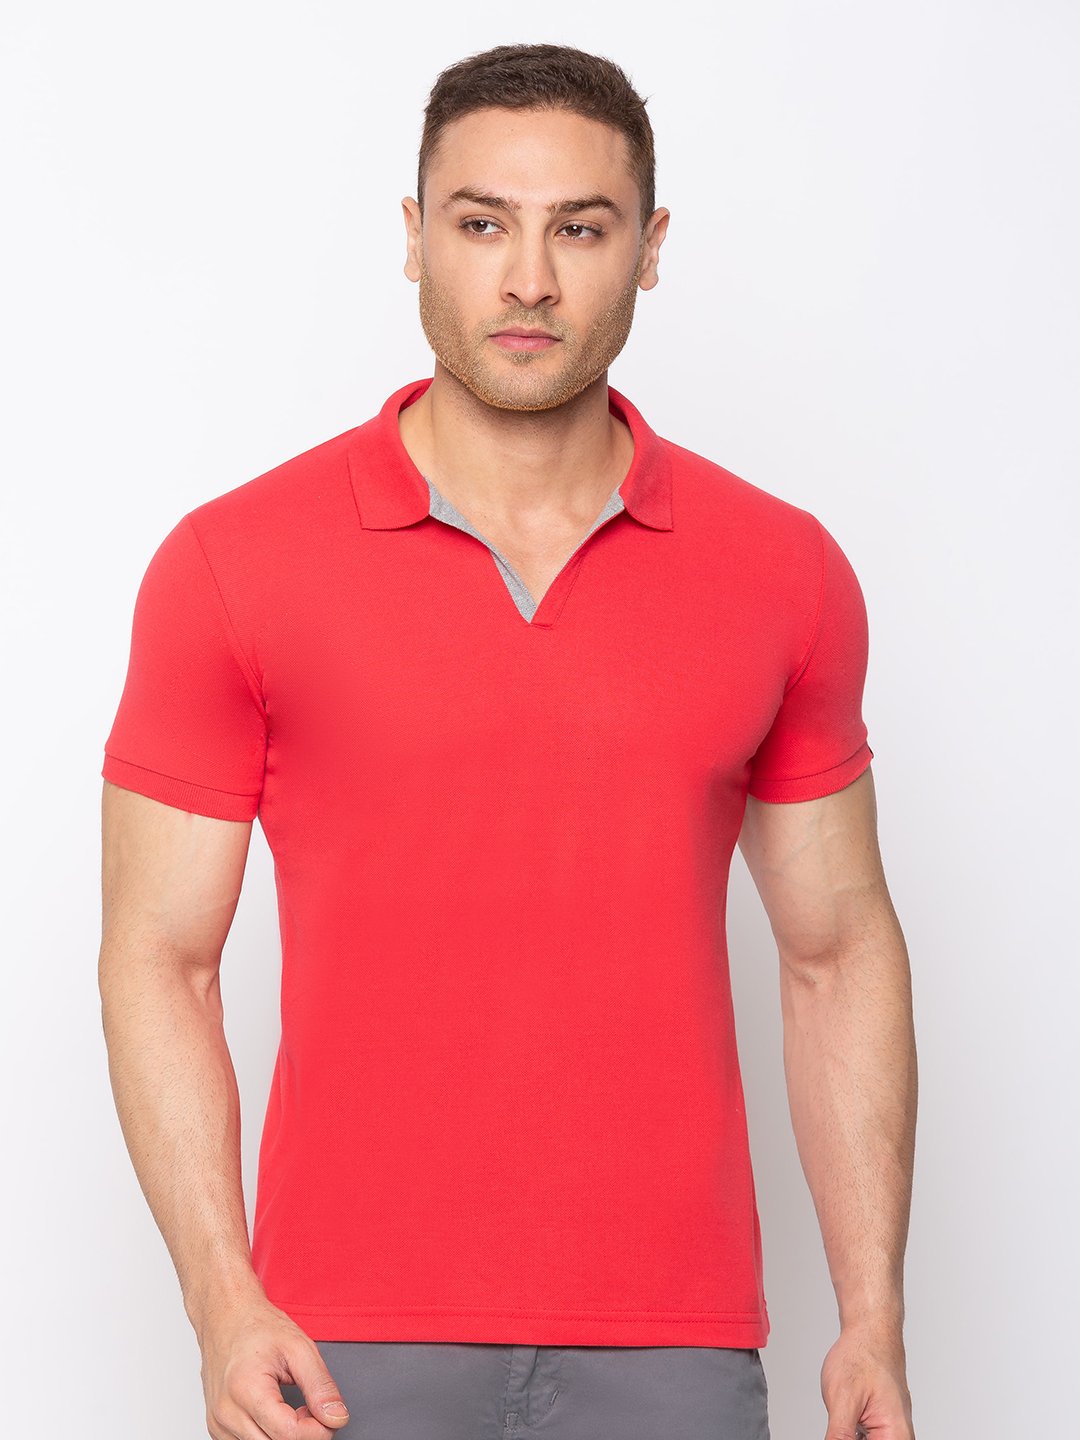 Status Quo |Solid T-shirt with Polo Collar - M, L, XL, XXL